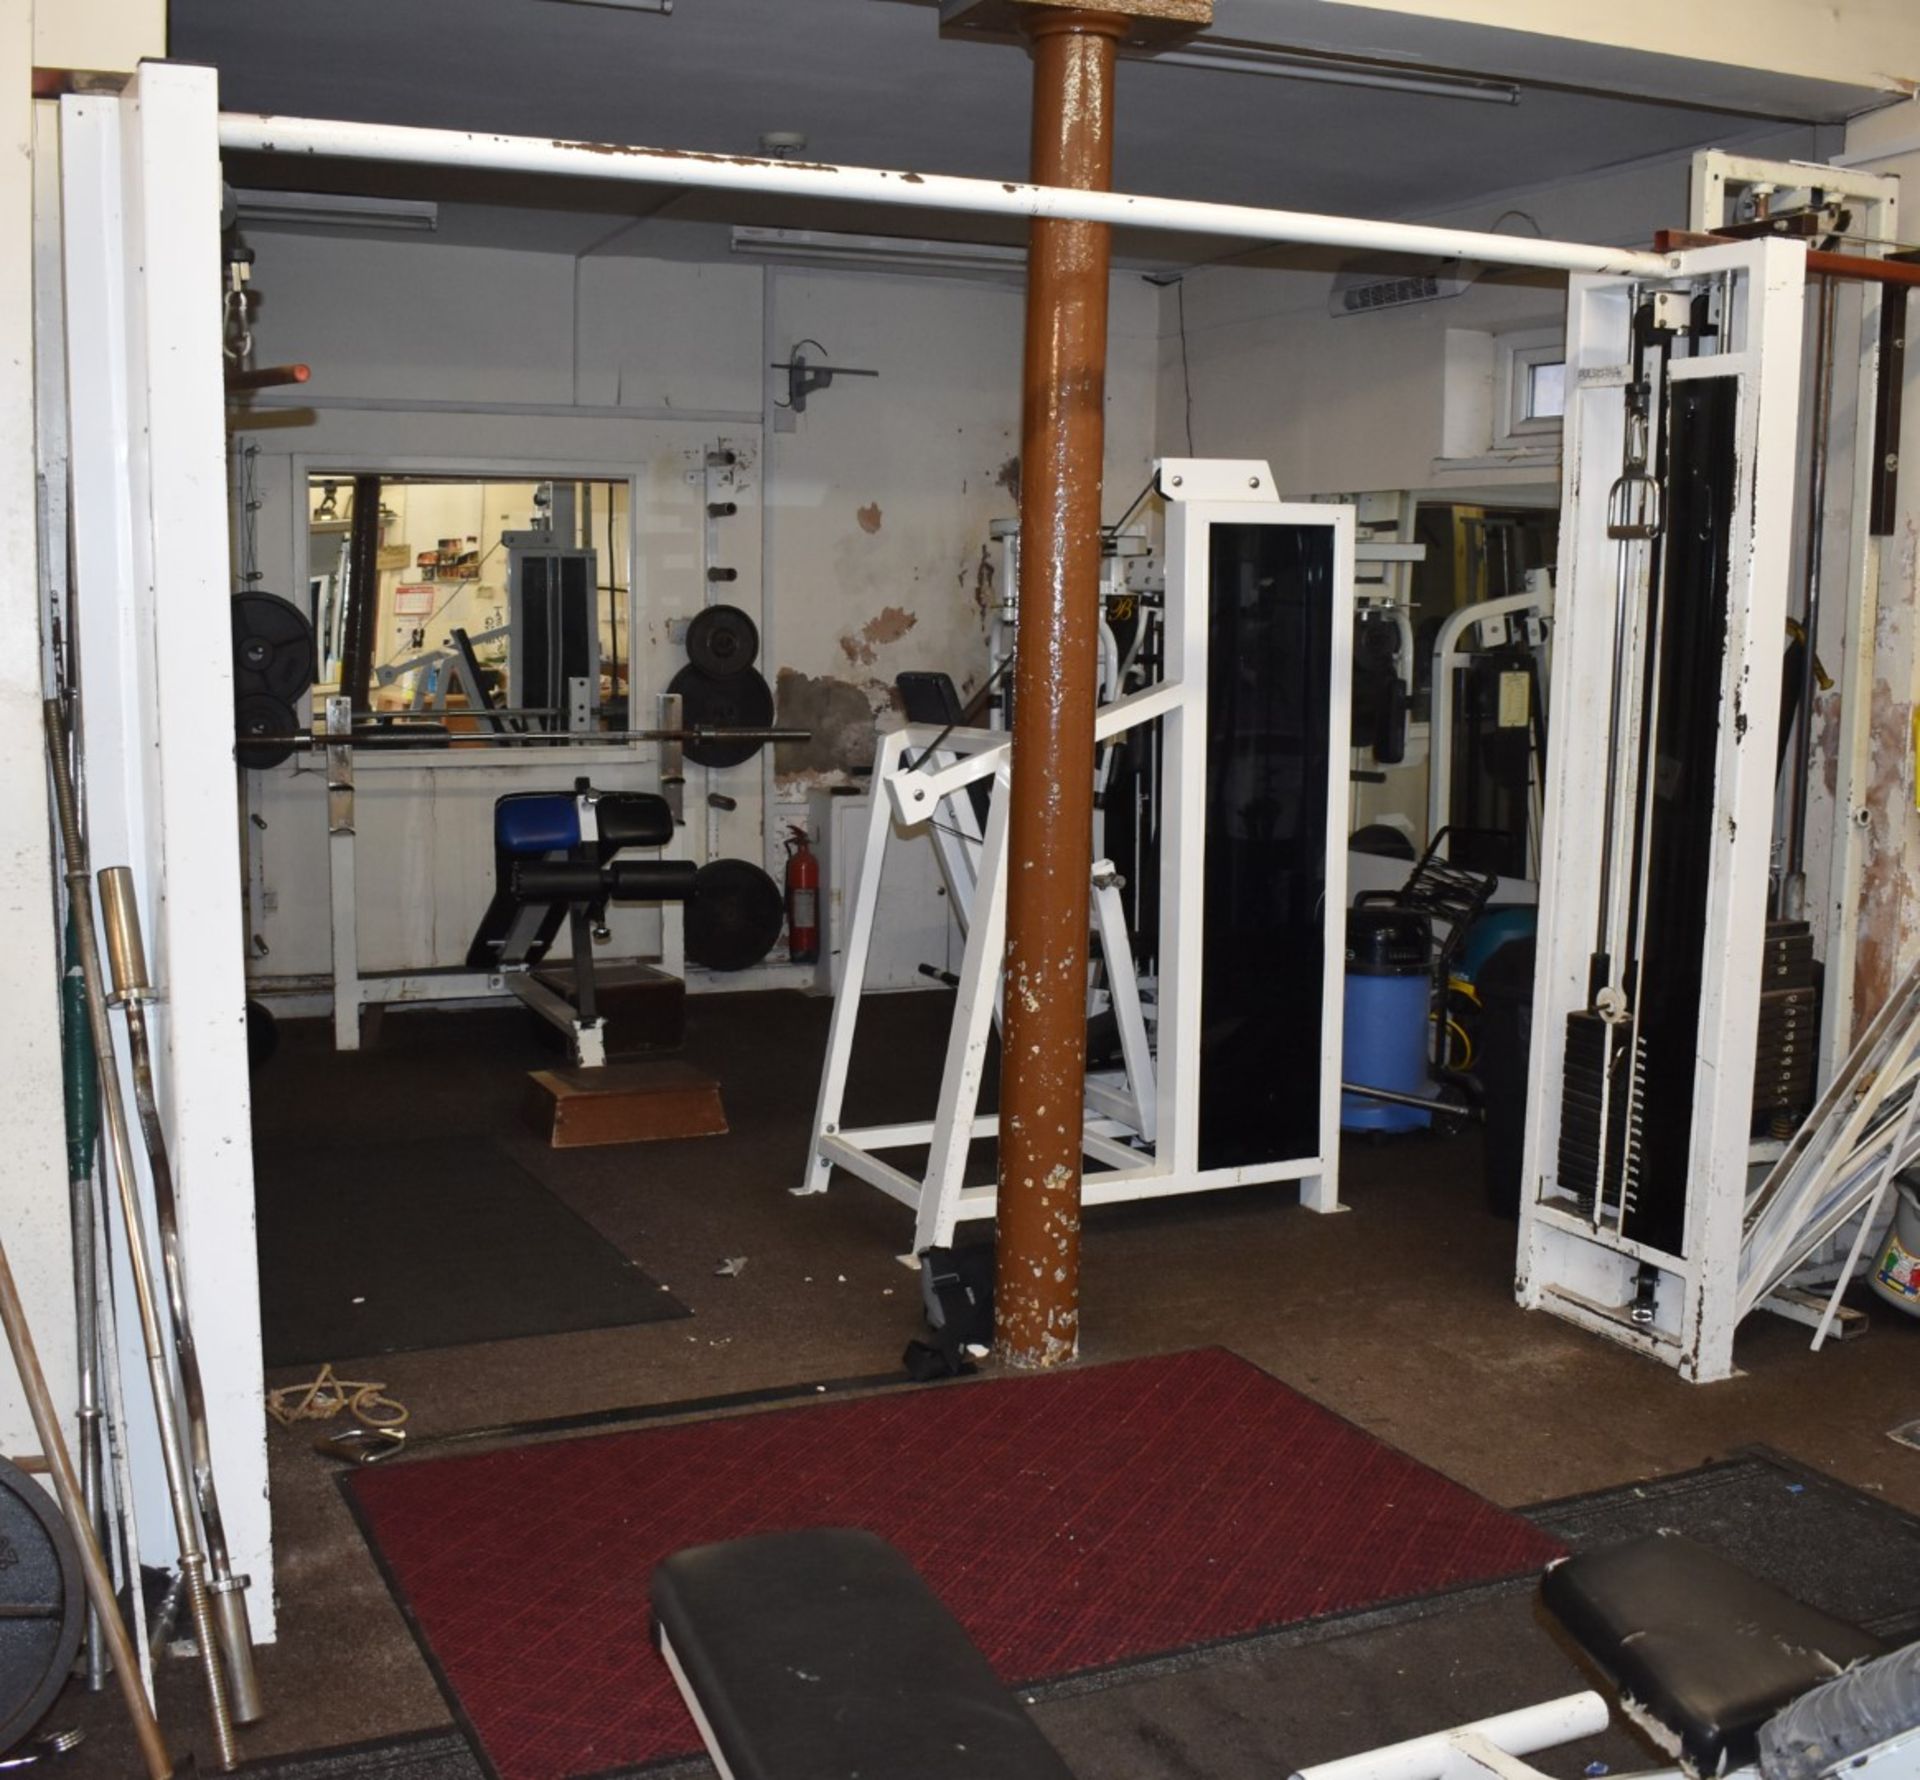 Contents of Bodybuilding and Strongman Gym - Includes Approx 30 Pieces of Gym Equipment, Floor Mats, - Image 13 of 31